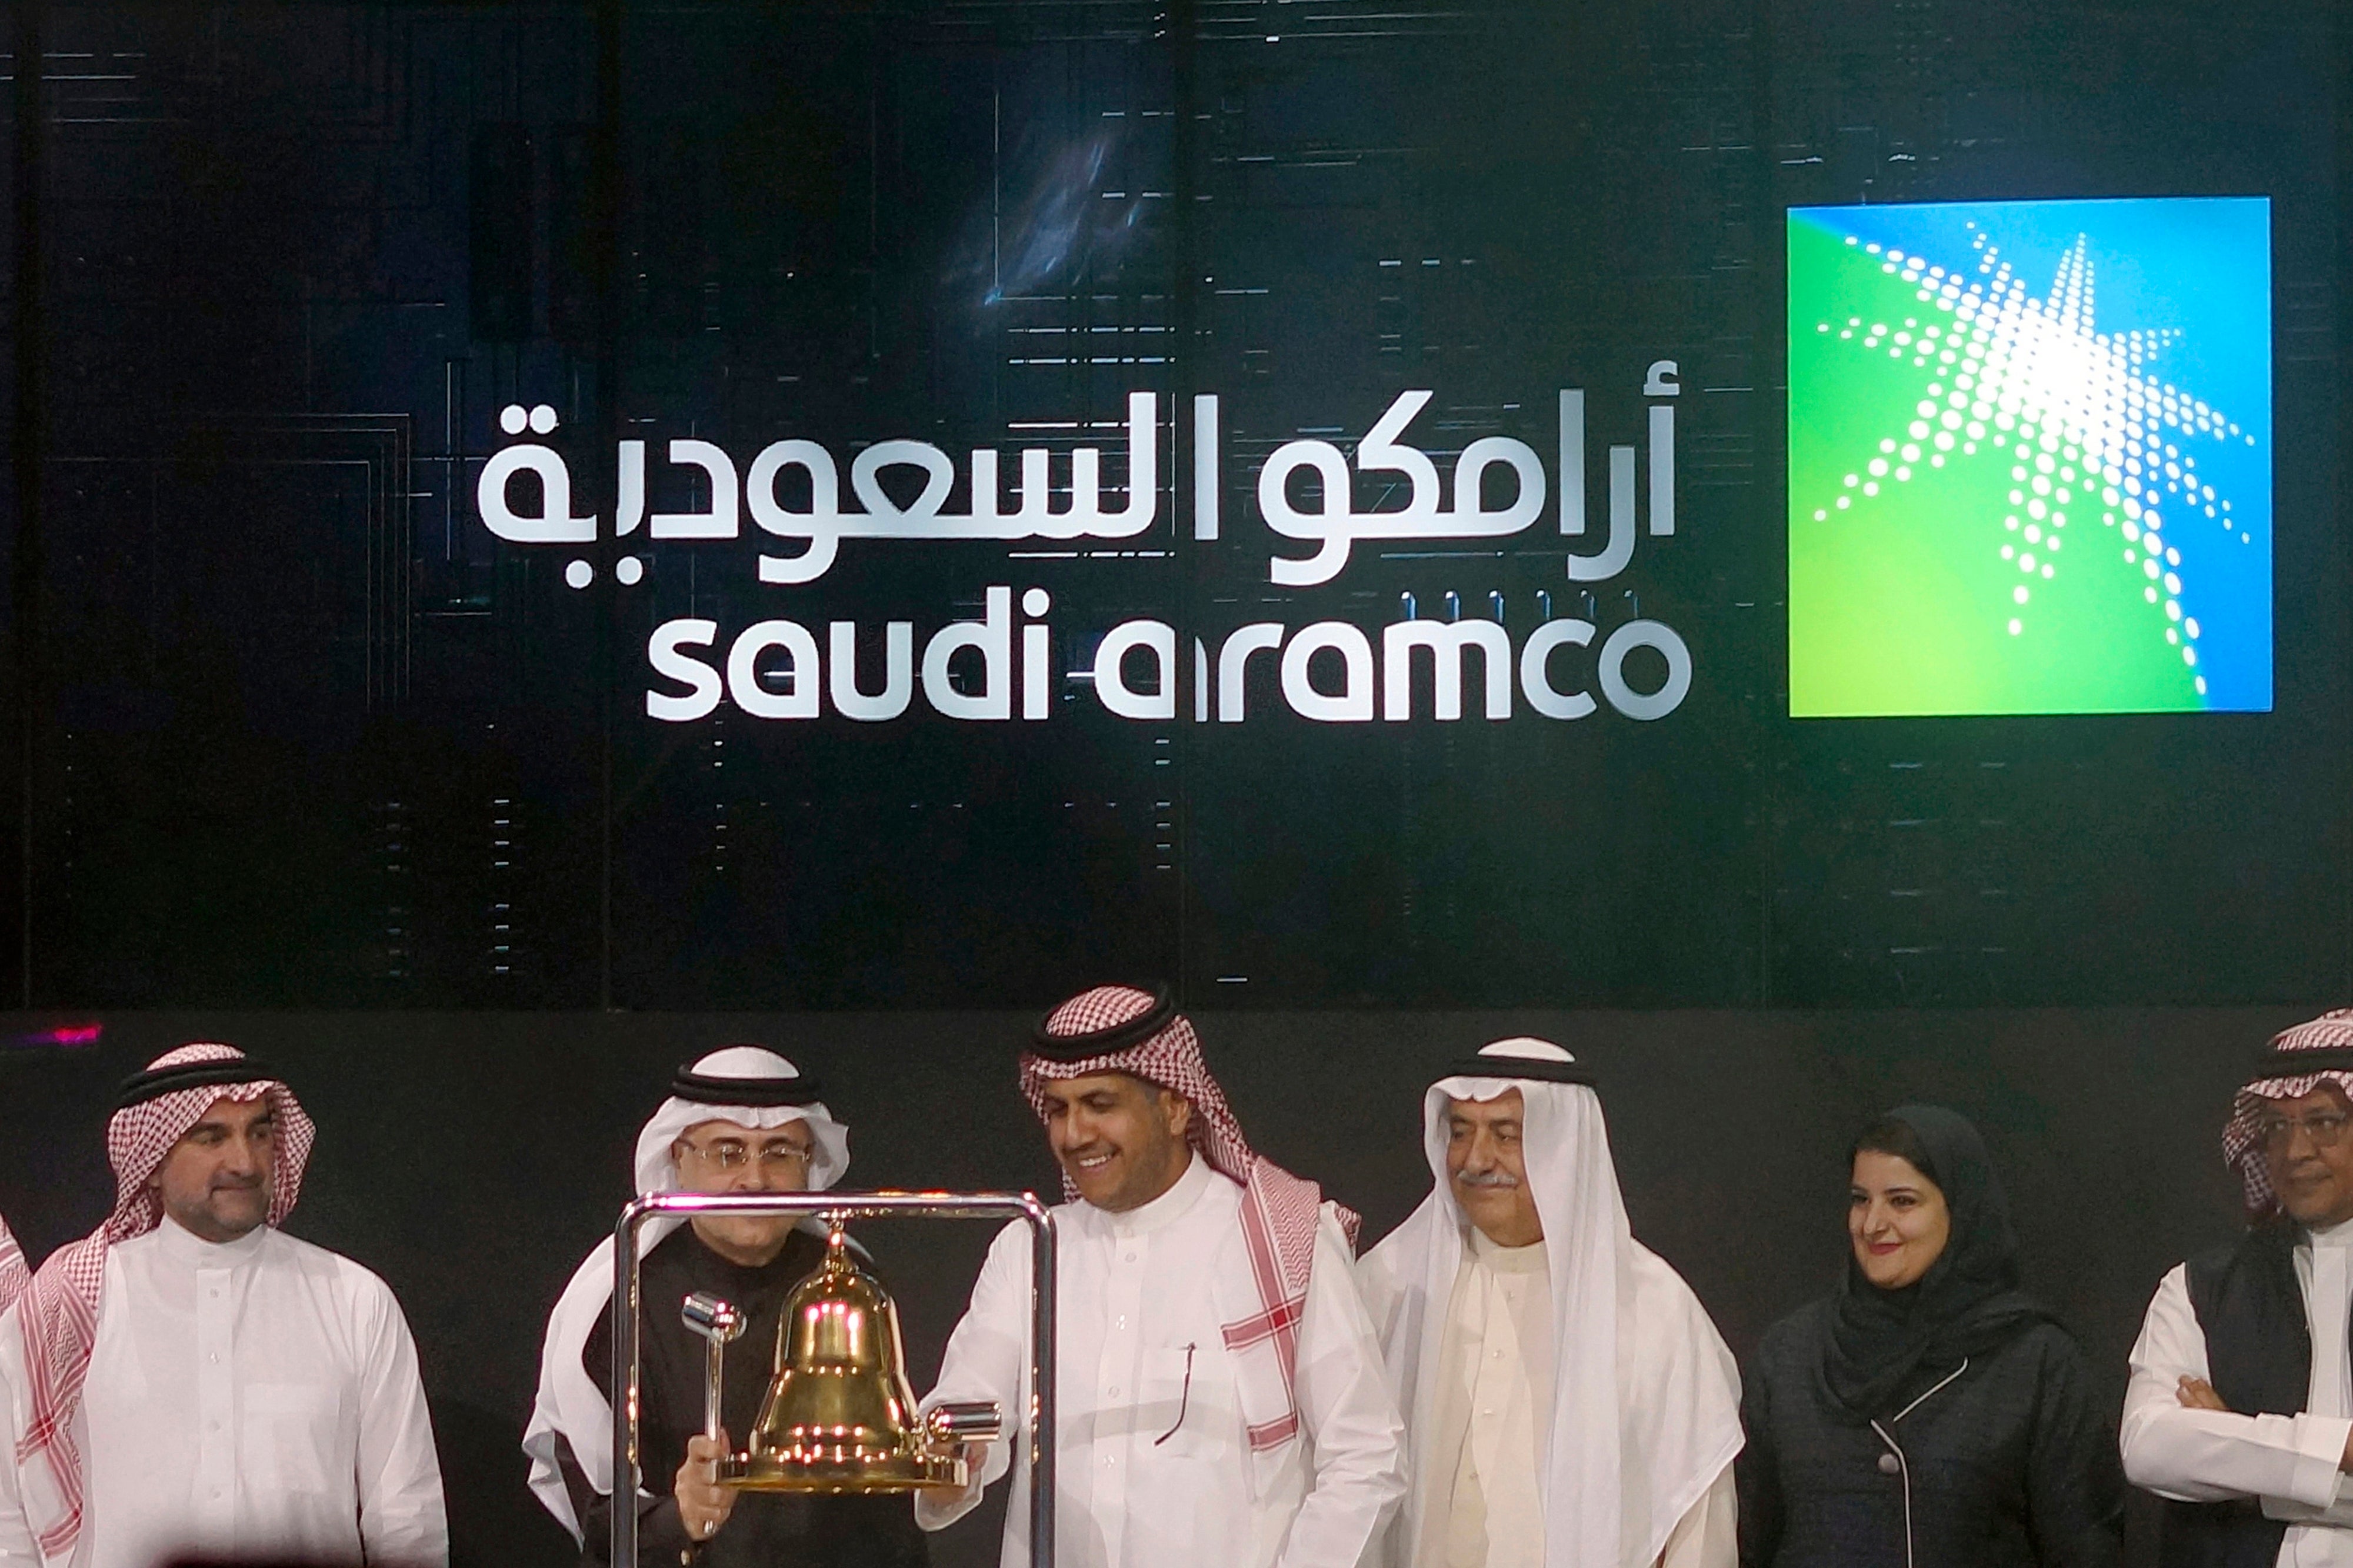 File imaghe: Saudi Arabia's state-owned oil company Aramco and stock market officials celebrate the debut of Aramco's initial public offering on the Riyadh Stock Market, in Riyadh in 2019.